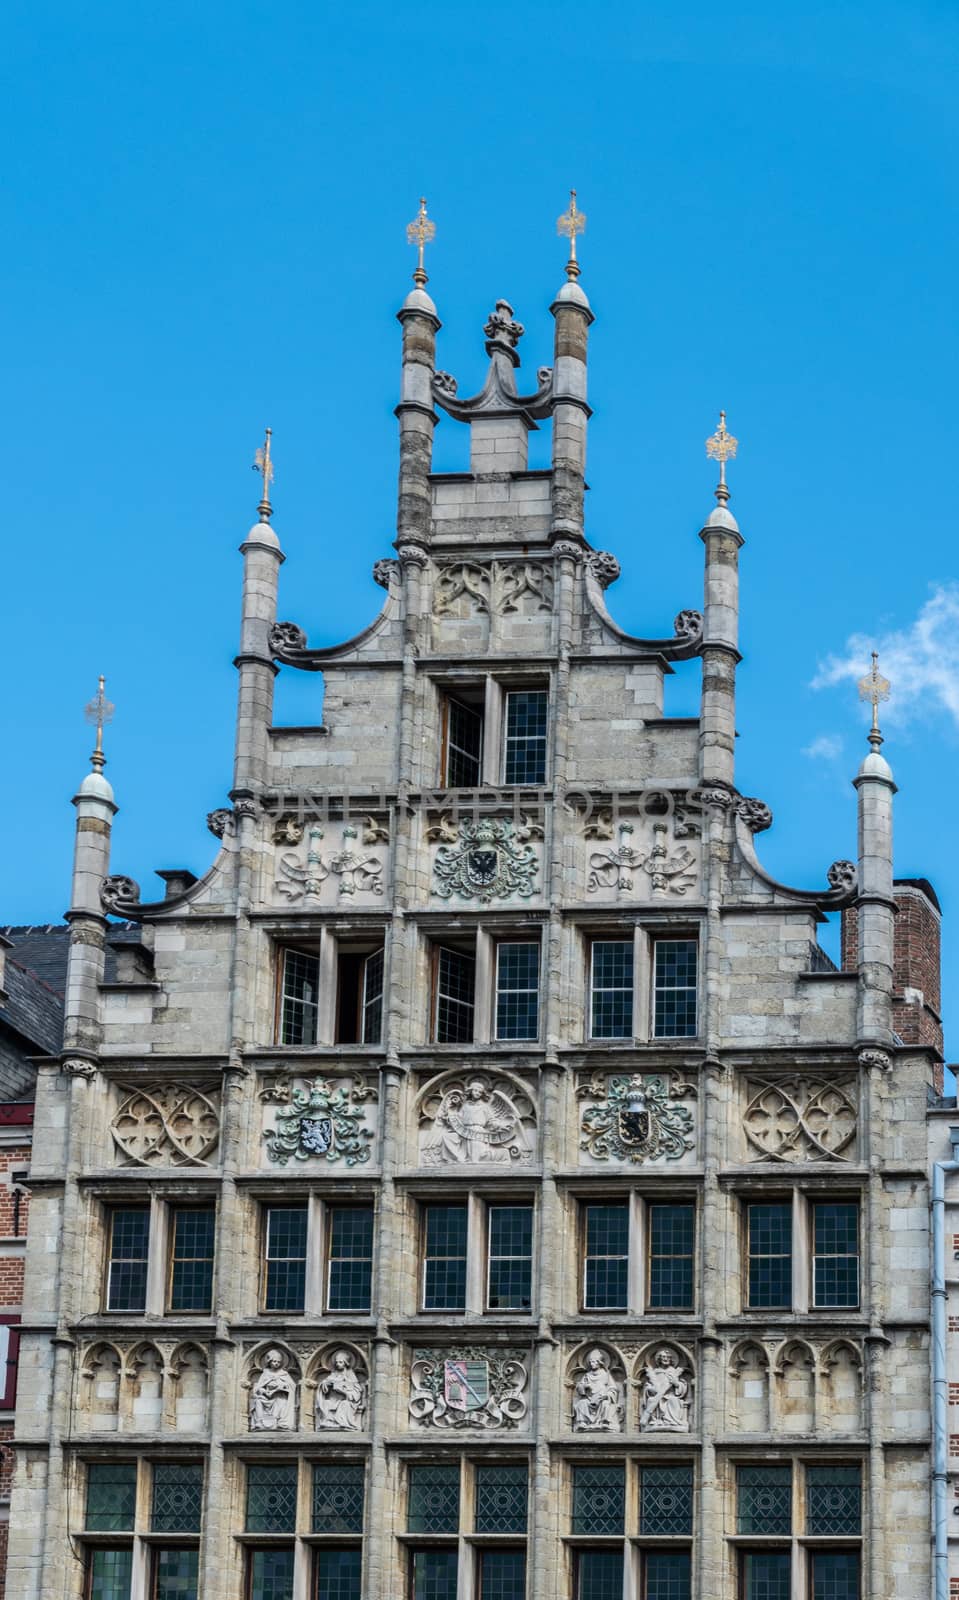 Gent, Flanders, Belgium -  June 21, 2019: Closeup of historic gray-stone gable of Graslei 8 building against blue sky. Frescoes on facade. Ornaments on top.